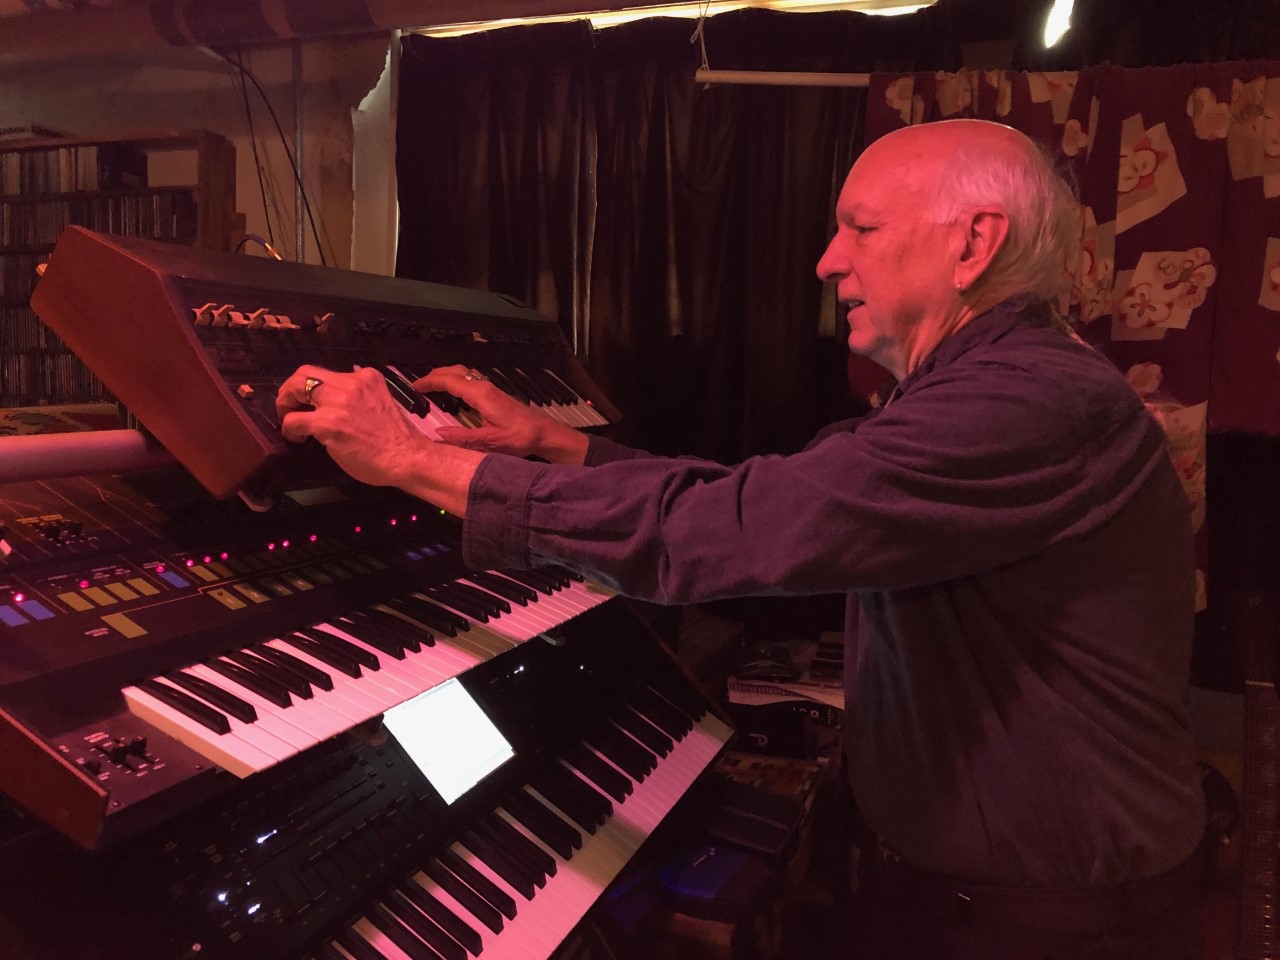 Tom Naunas plays Don Voegeli's former synthesizers, an ARP Quadra and an ARP Soloist, in his home studio.